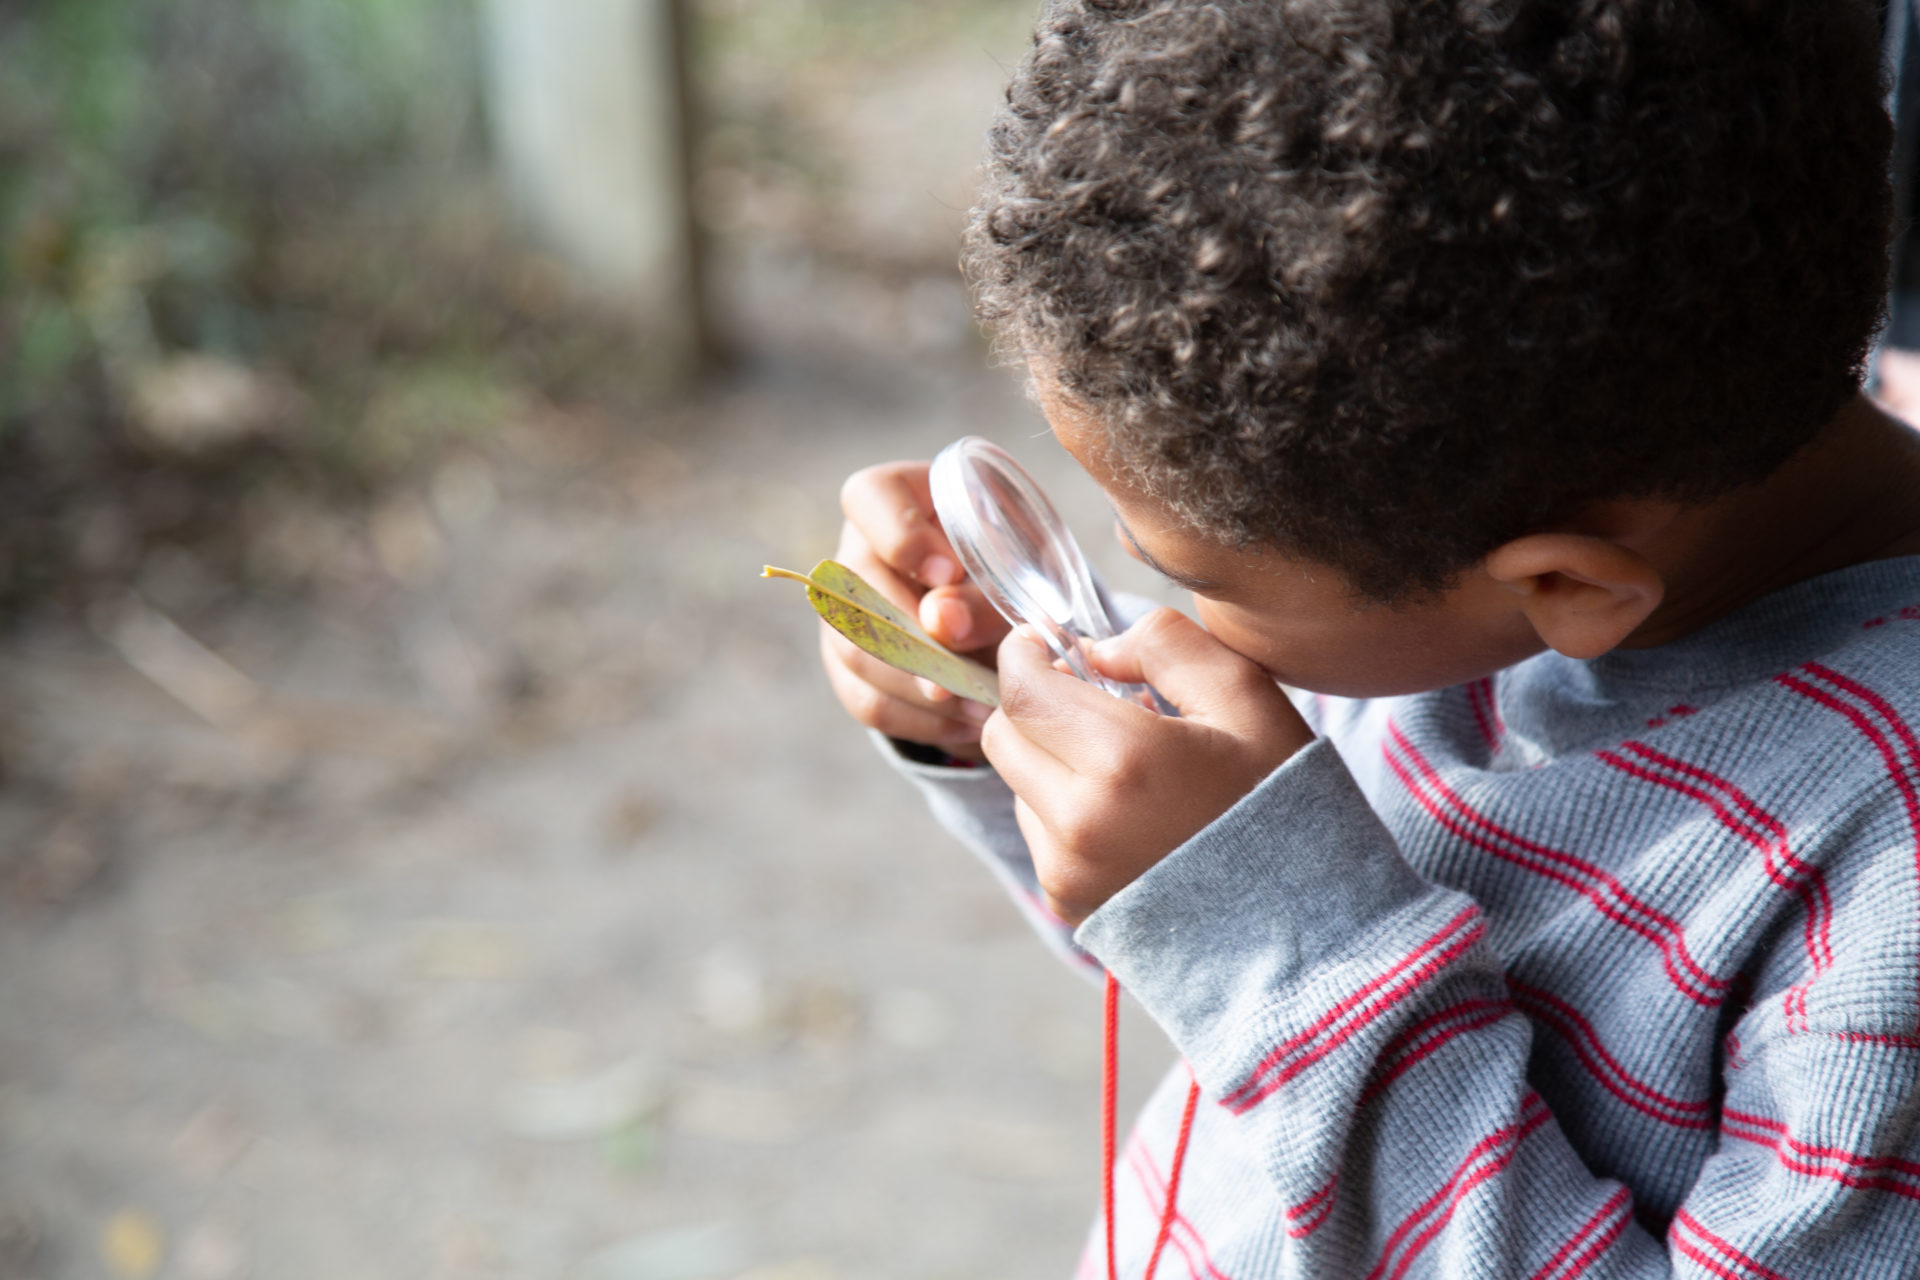 Child looking through a hand held magnifying glass at a leaf